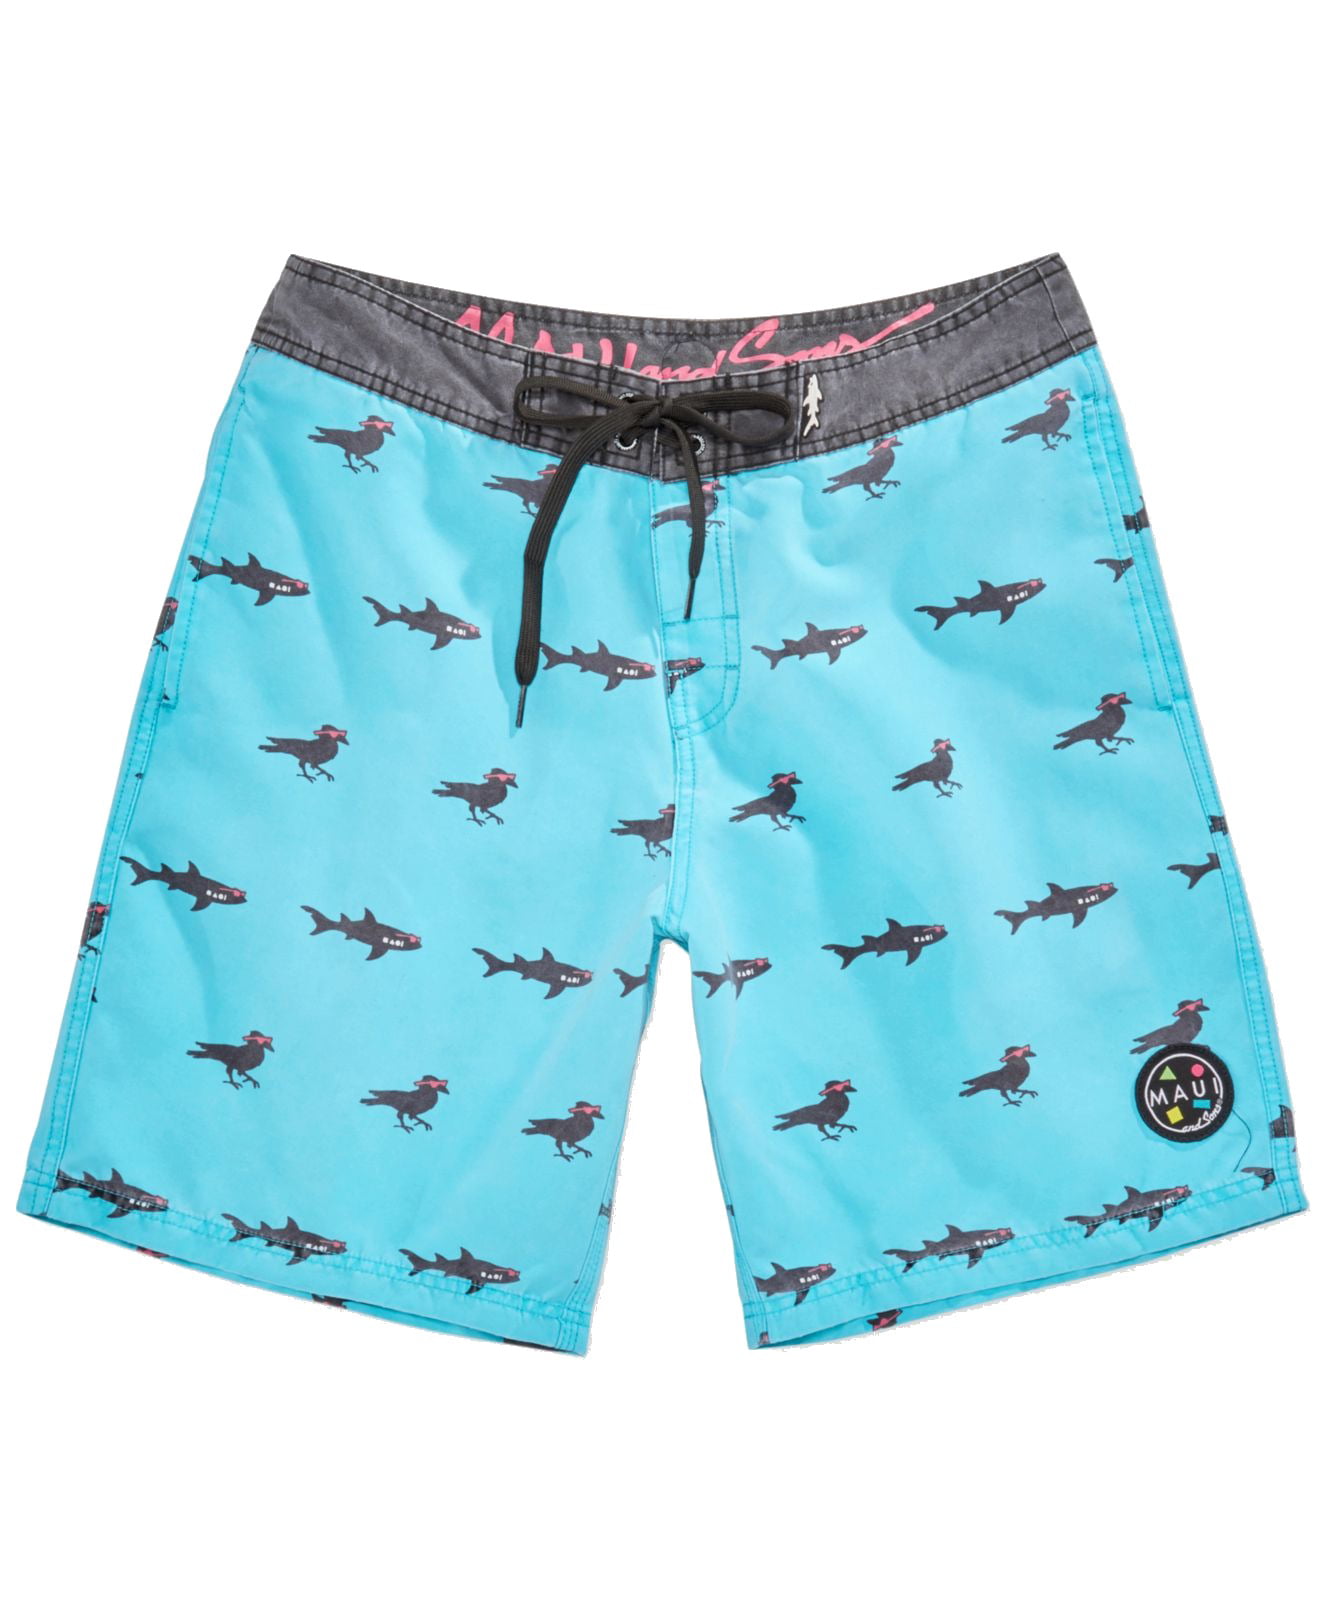 MAUI AND SONS - Maui and Sons NEW Blue Mens Size 32 Shark Drawstring ...